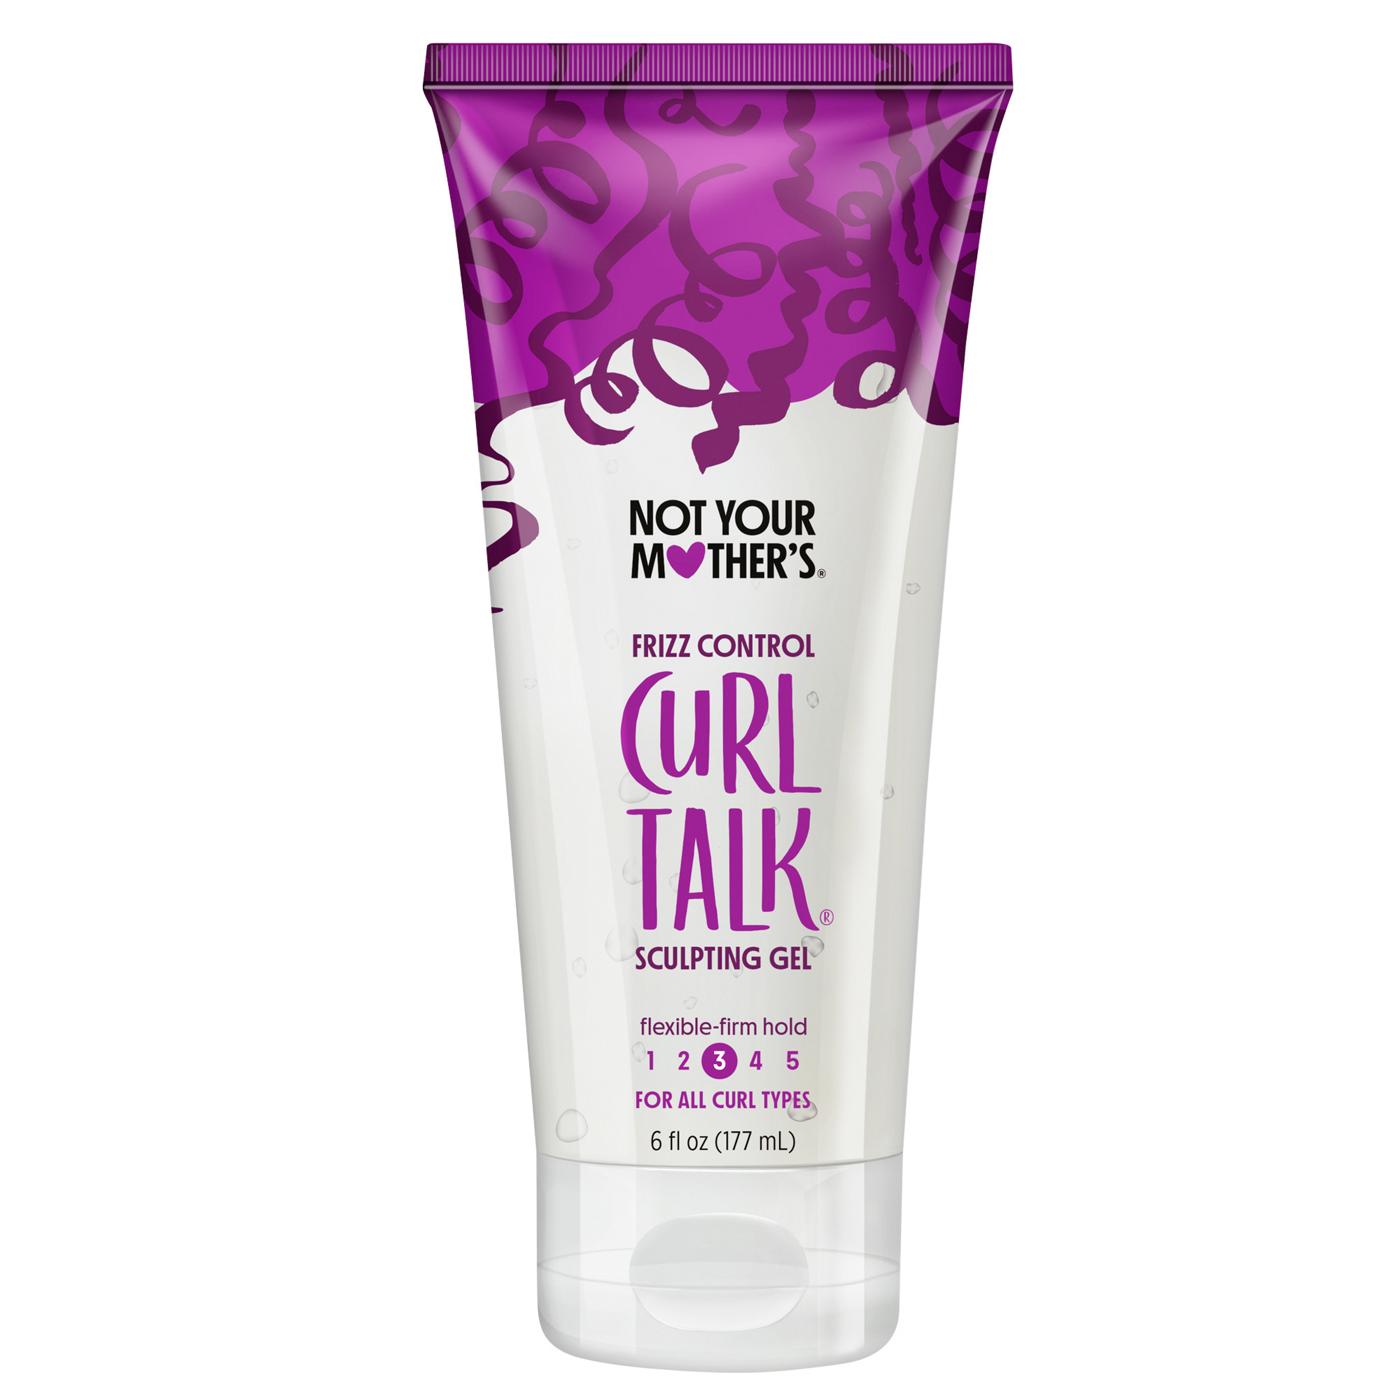 Not Your Mother's Curl Talk Frizz Control Sculpting Gel; image 1 of 3